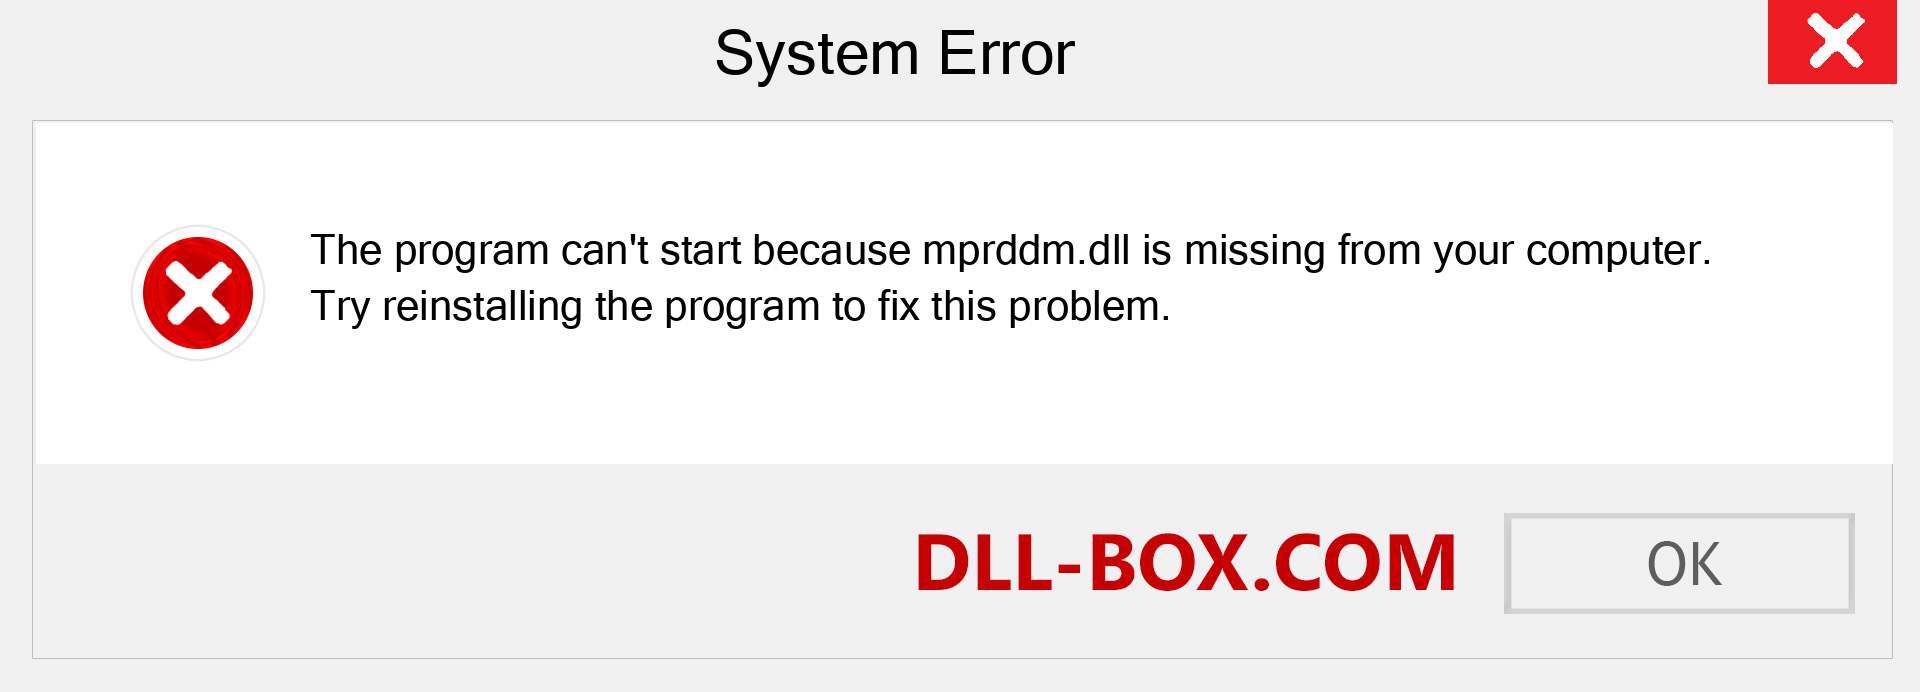  mprddm.dll file is missing?. Download for Windows 7, 8, 10 - Fix  mprddm dll Missing Error on Windows, photos, images